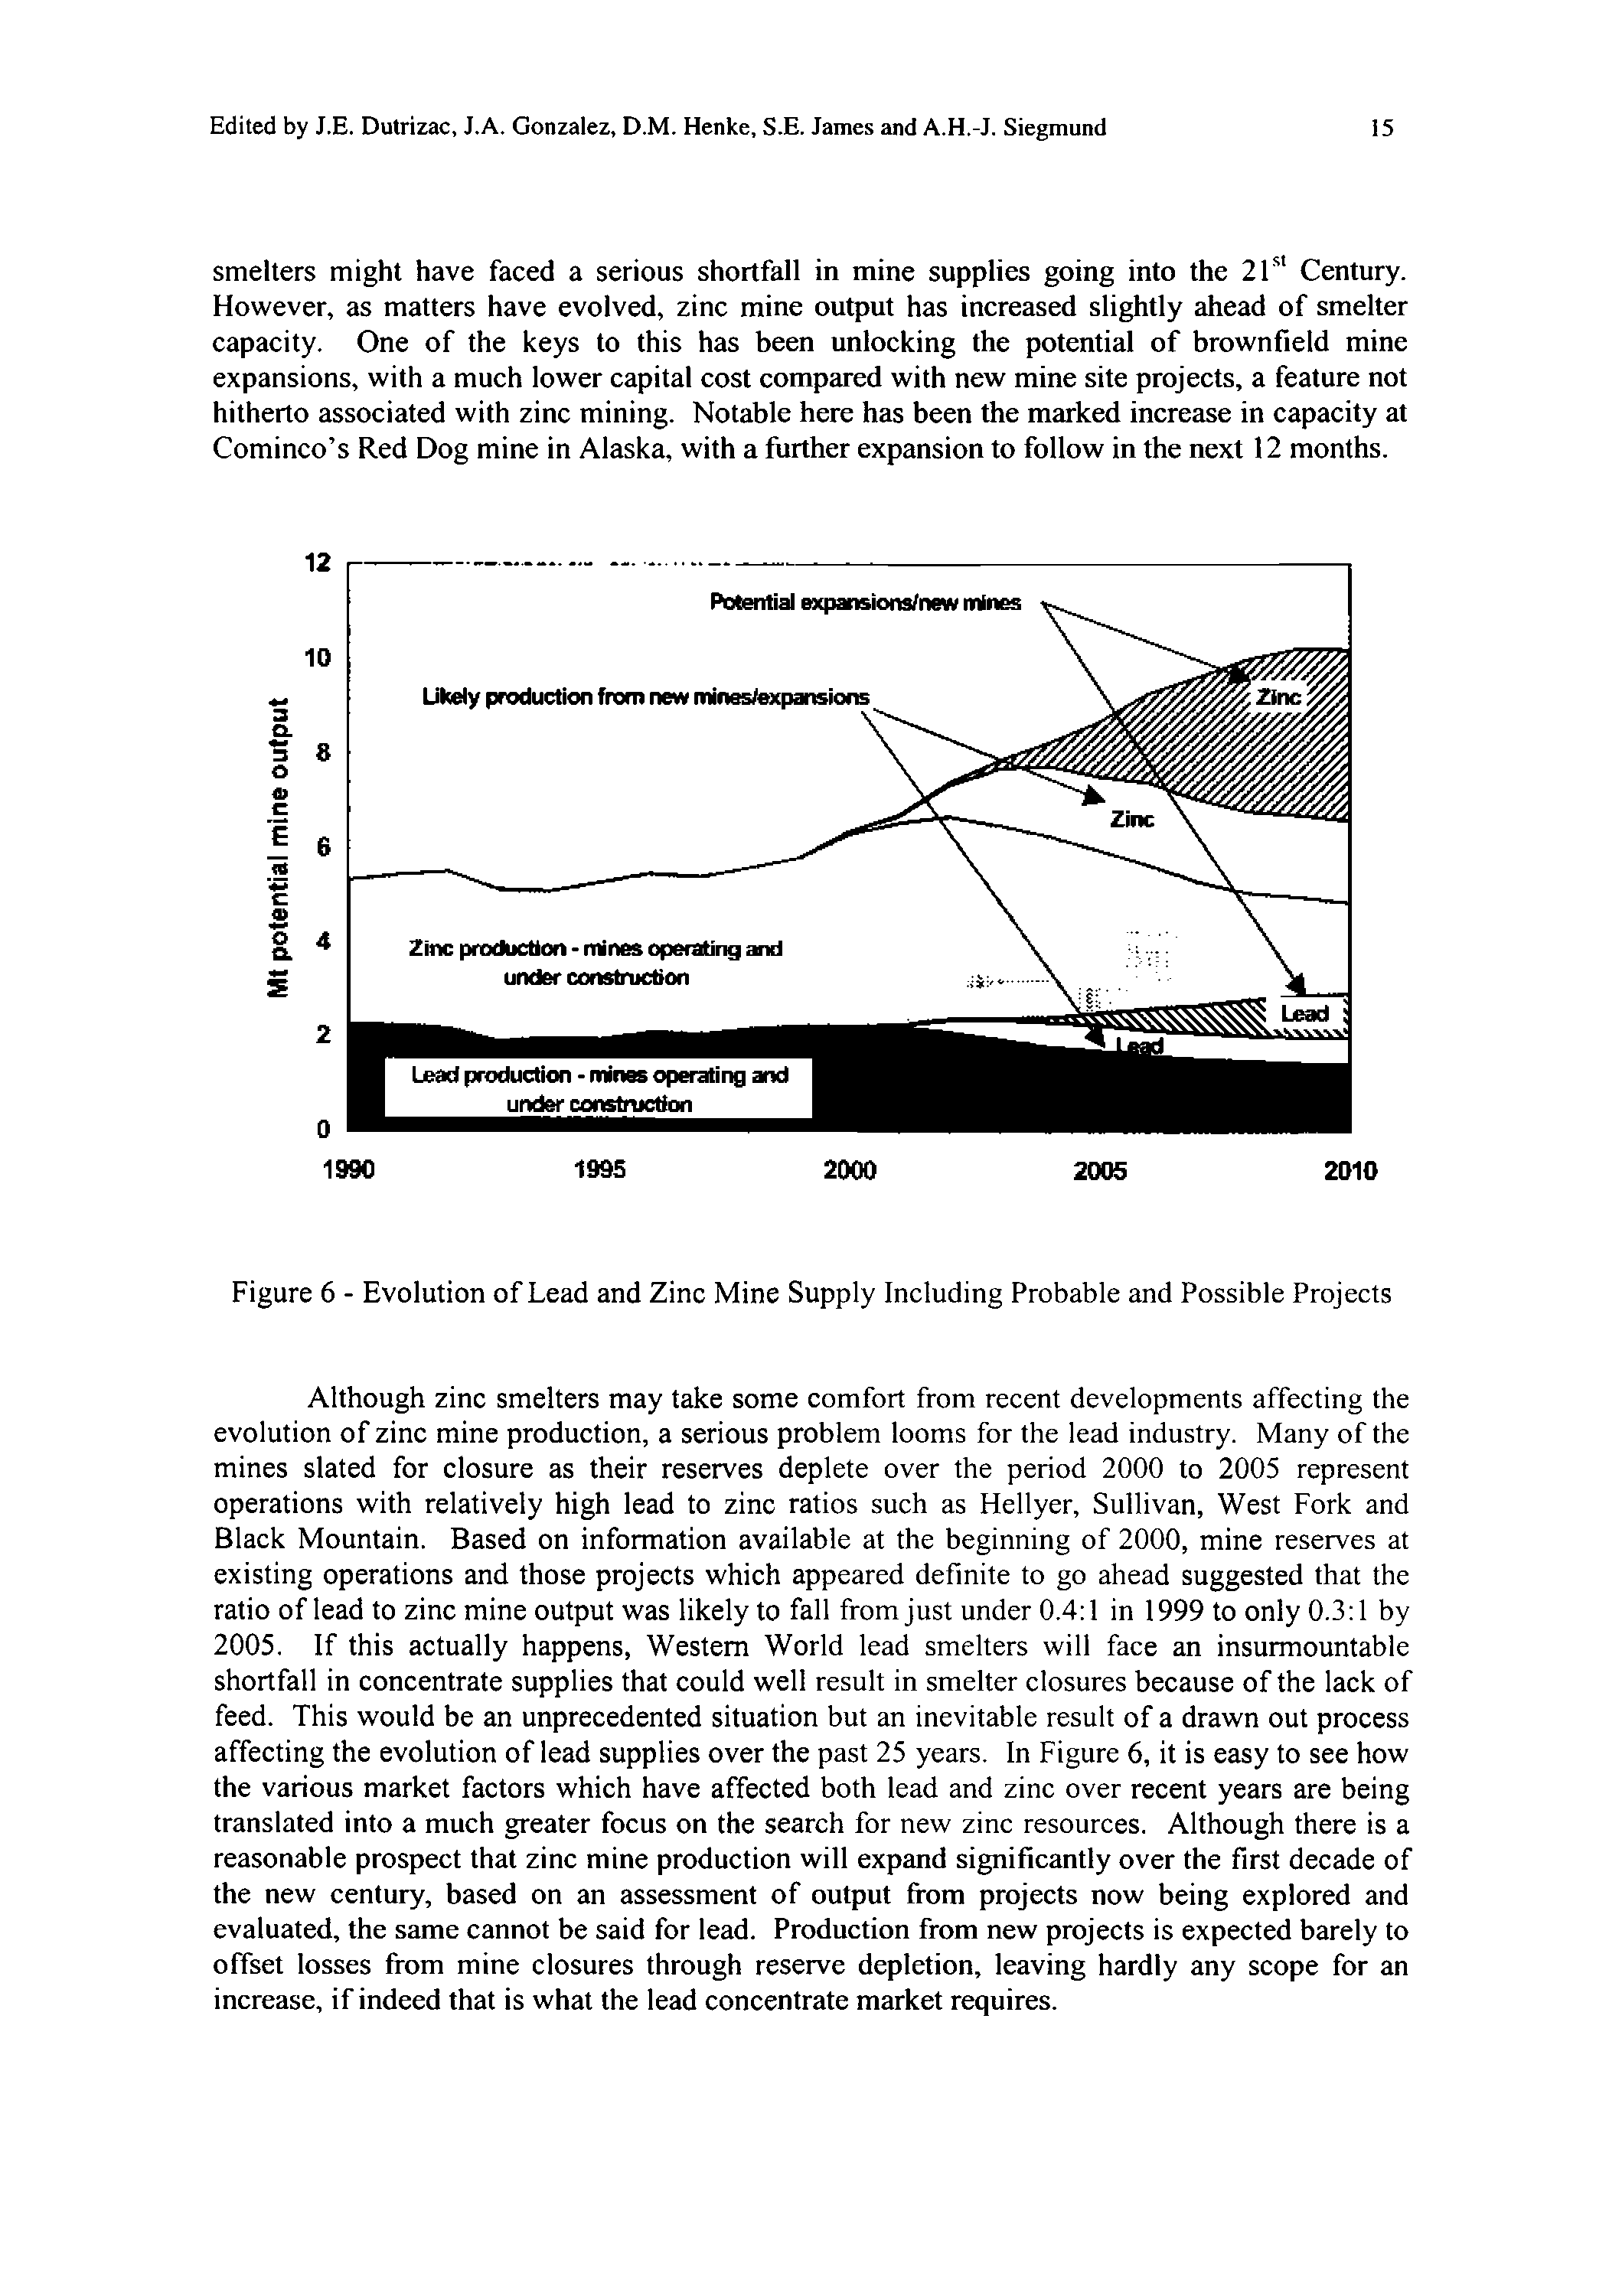 Figure 6 - Evolution of Lead and Zinc Mine Supply Including Probable and Possible Projects...